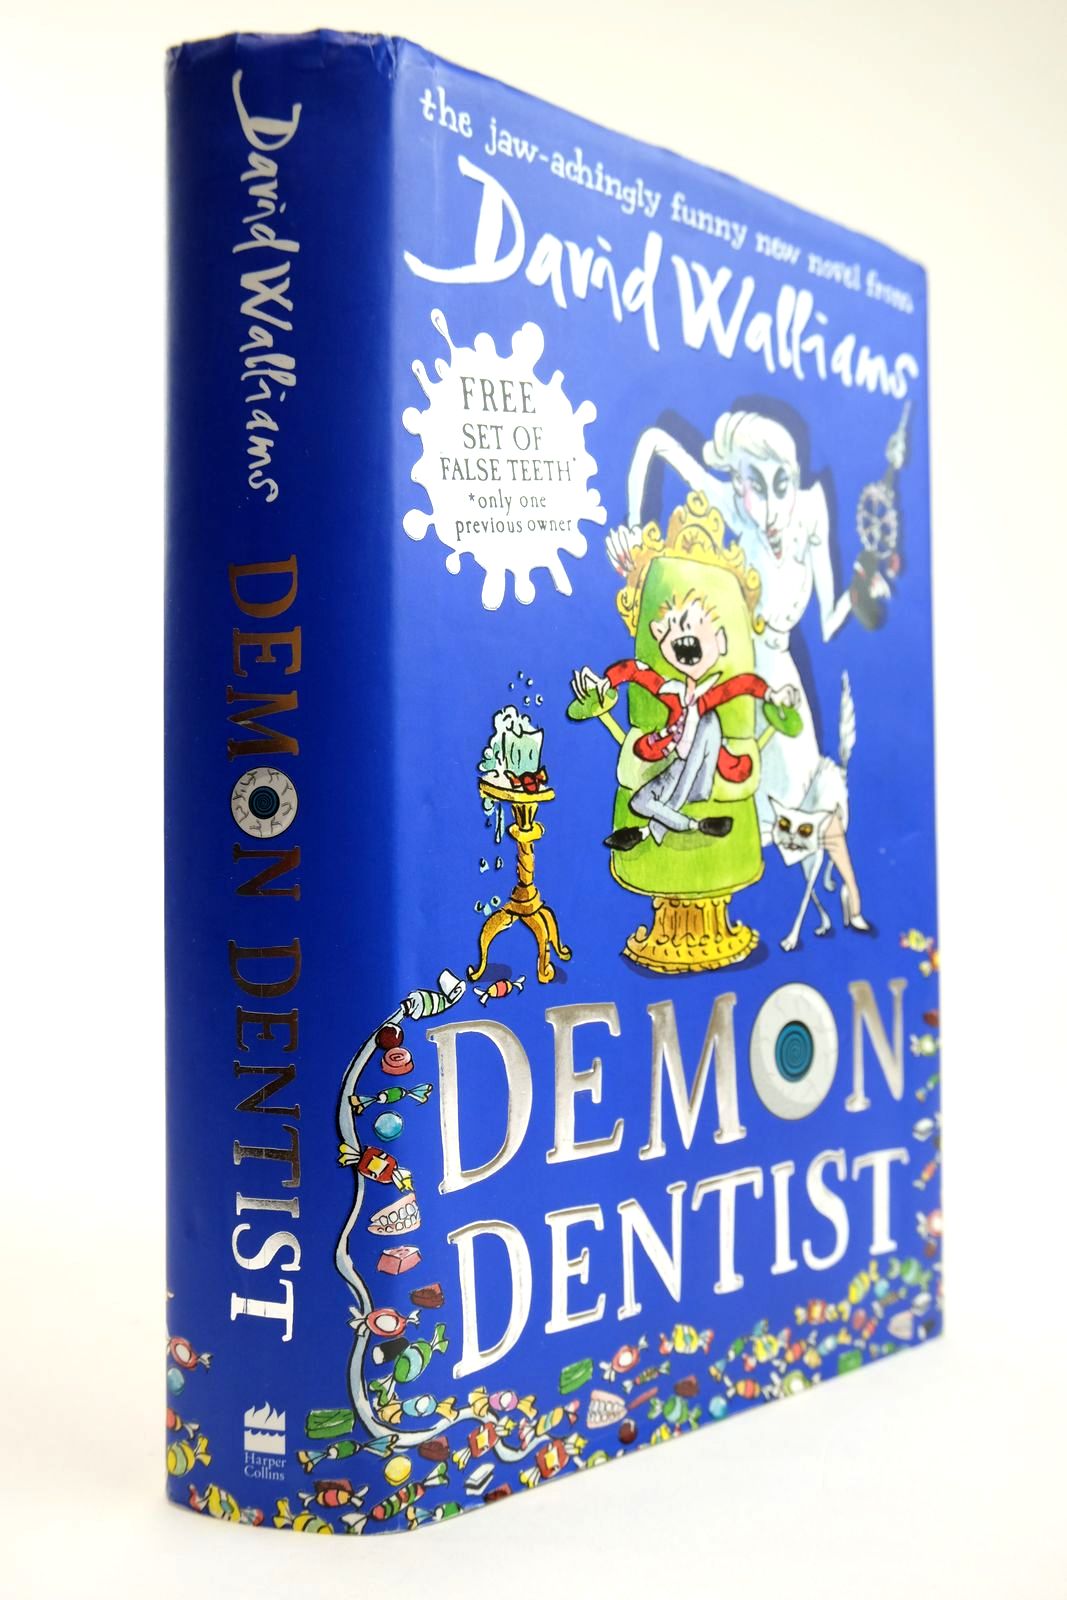 Photo of DEMON DENTIST written by Walliams, David illustrated by Ross, Tony published by Harper Collins Childrens Books (STOCK CODE: 2133539)  for sale by Stella & Rose's Books